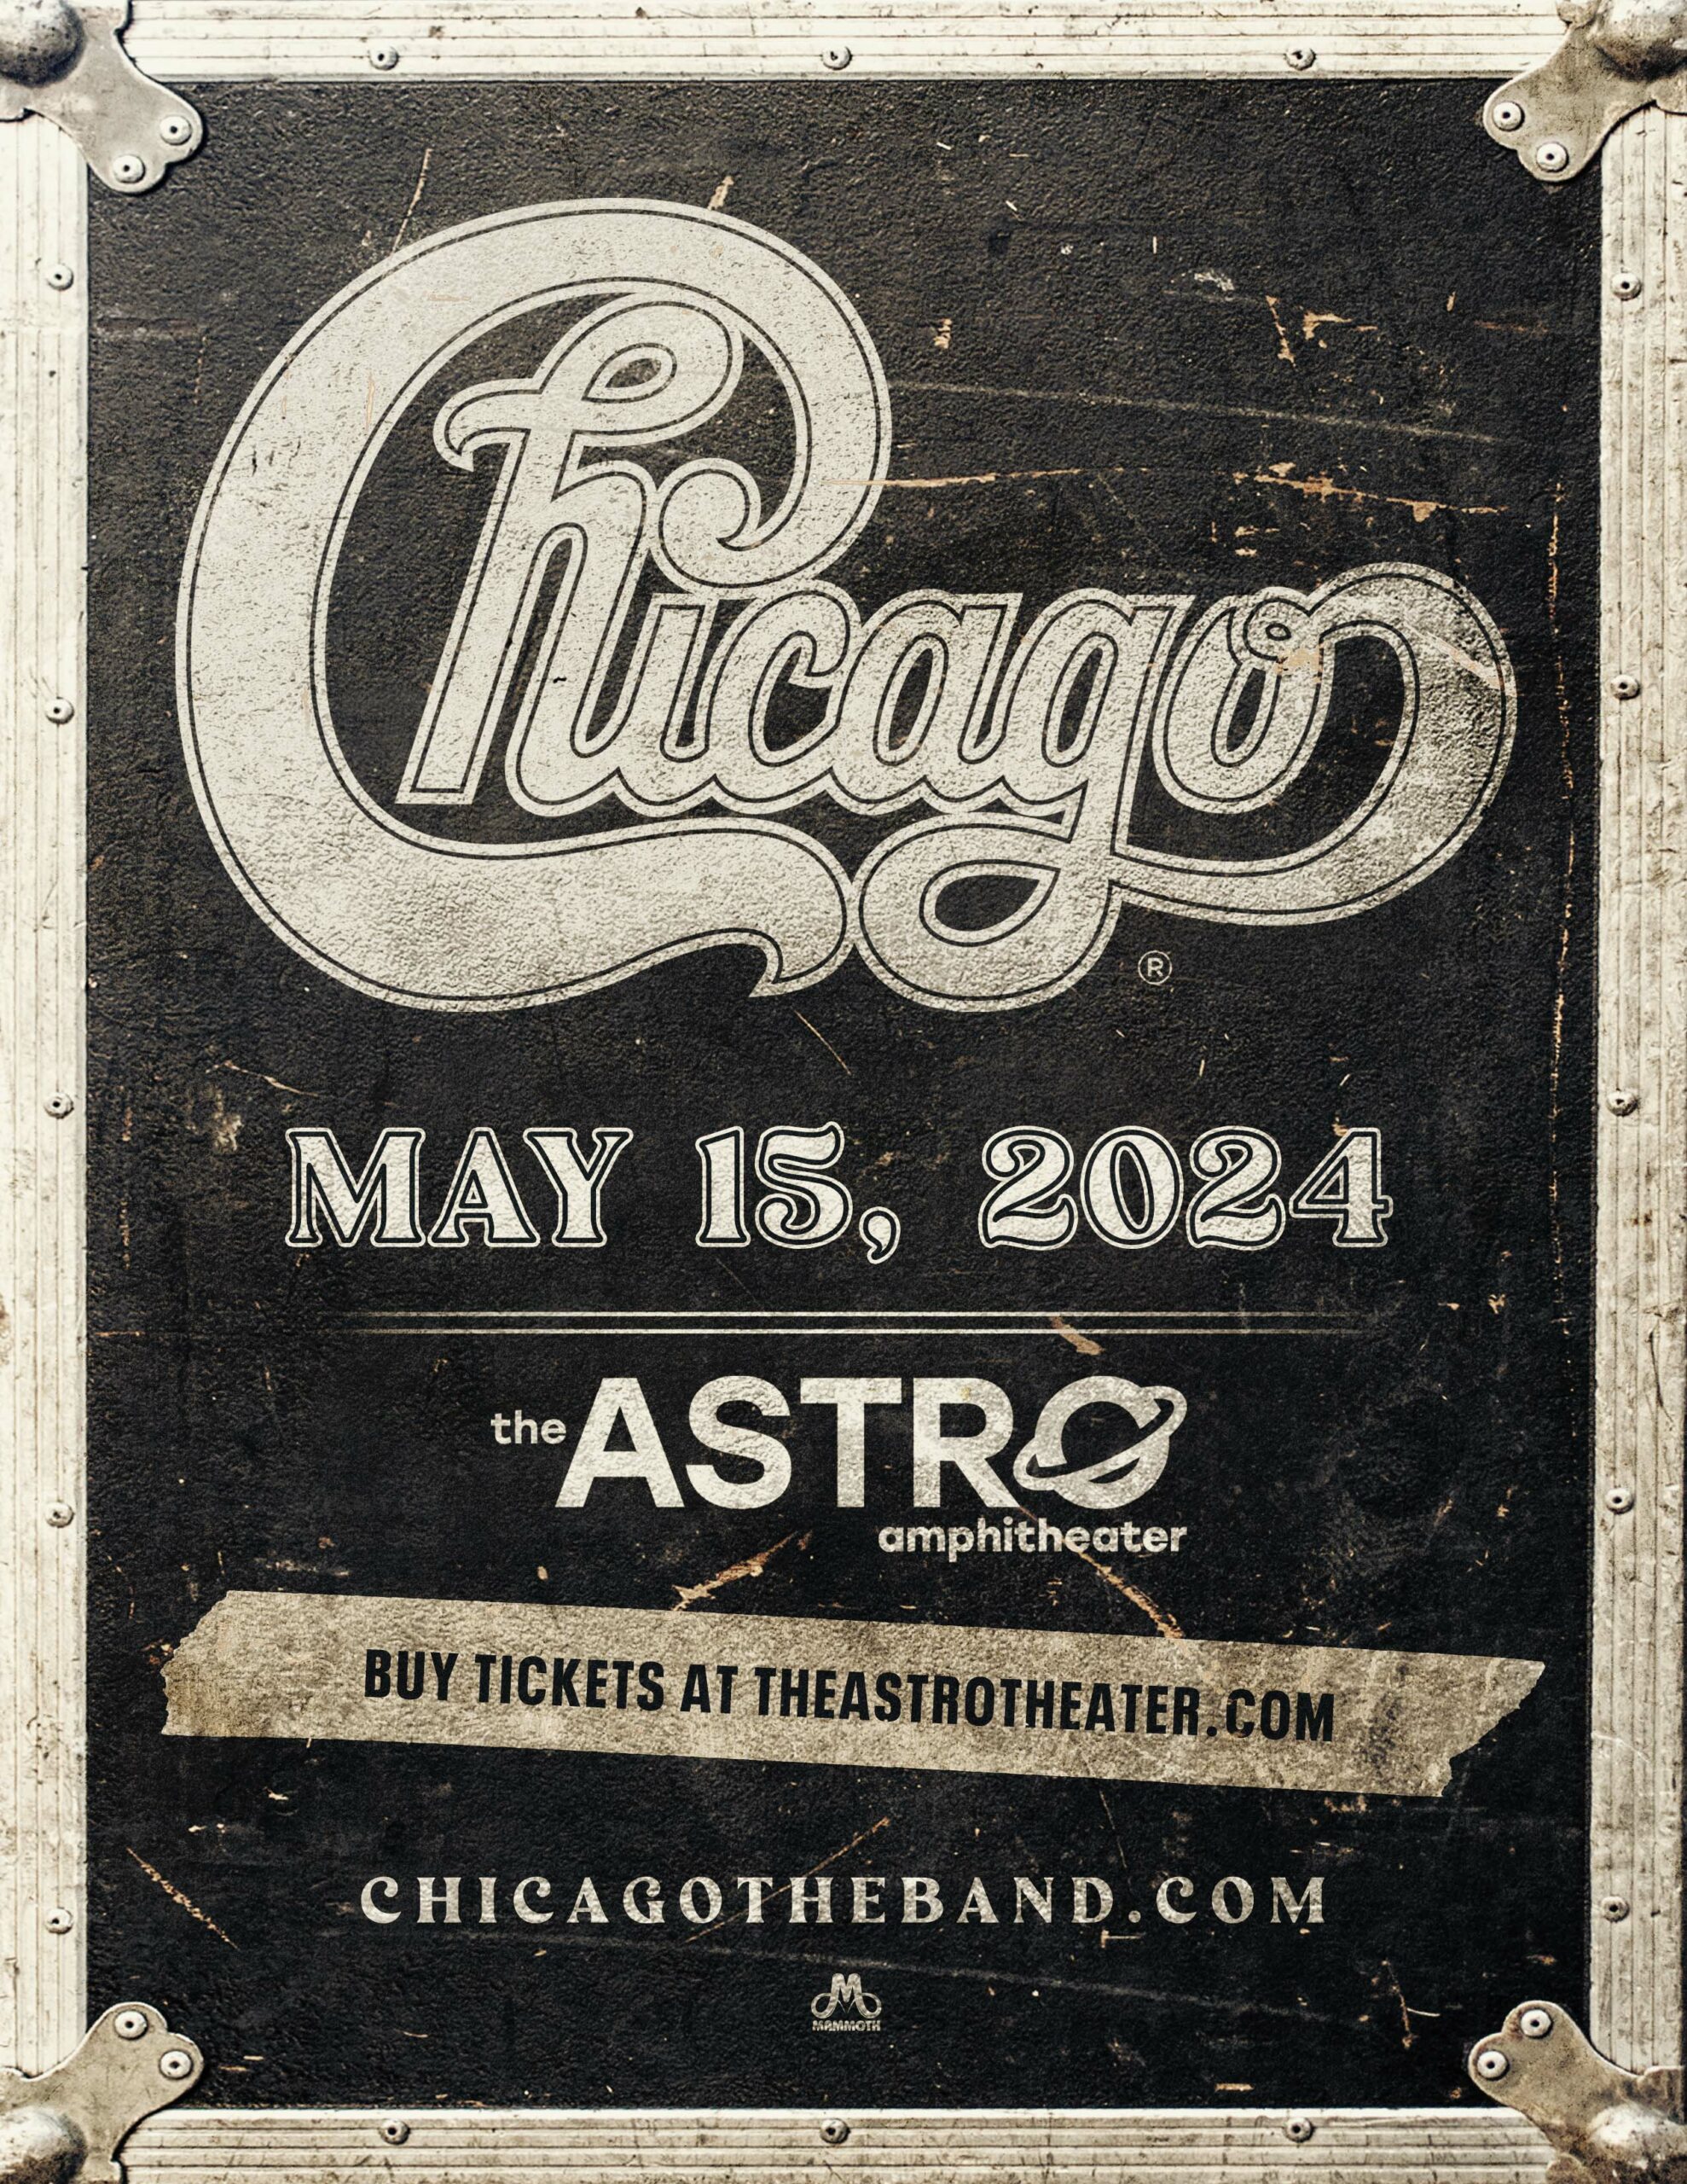 <h1 class="tribe-events-single-event-title">Chicago @ The Astro</h1>